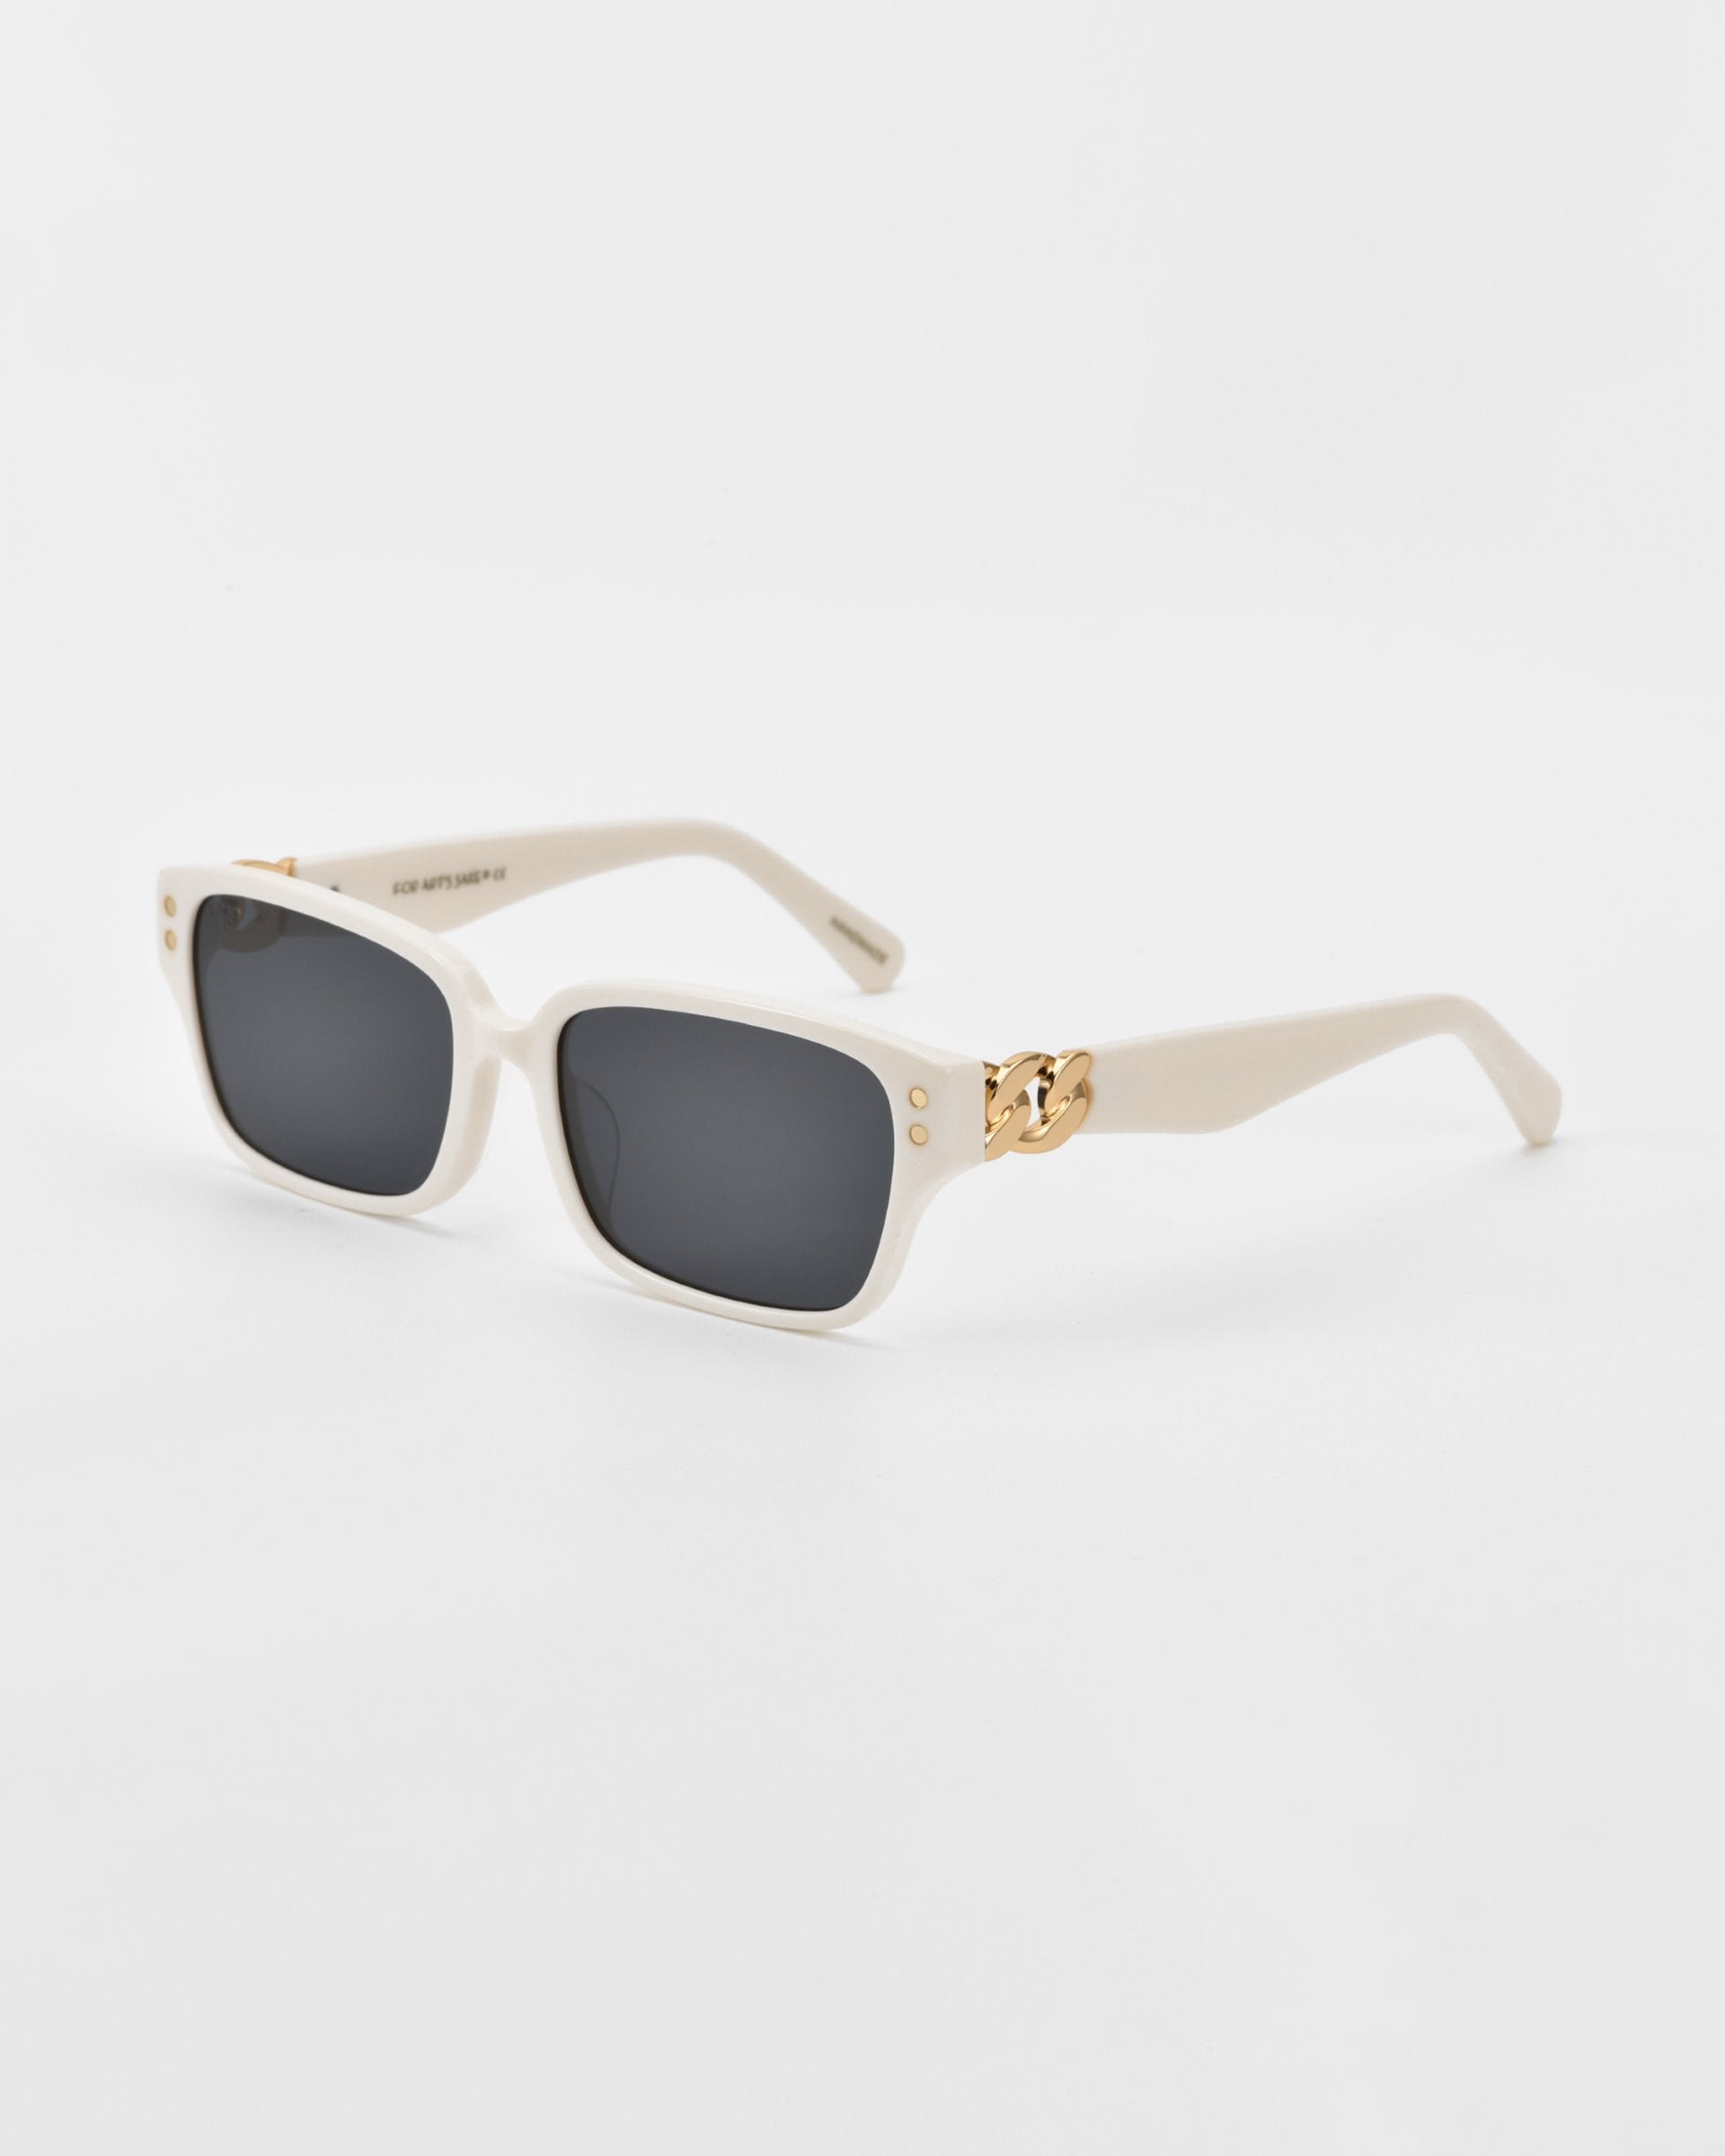 Image of a stylish pair of white For Art&#39;s Sake® Zenith sunglasses with dark lenses. The frame, handcrafted from acetate, features gold decorative elements at the hinges, adding a touch of elegance to the design. The background is plain white.